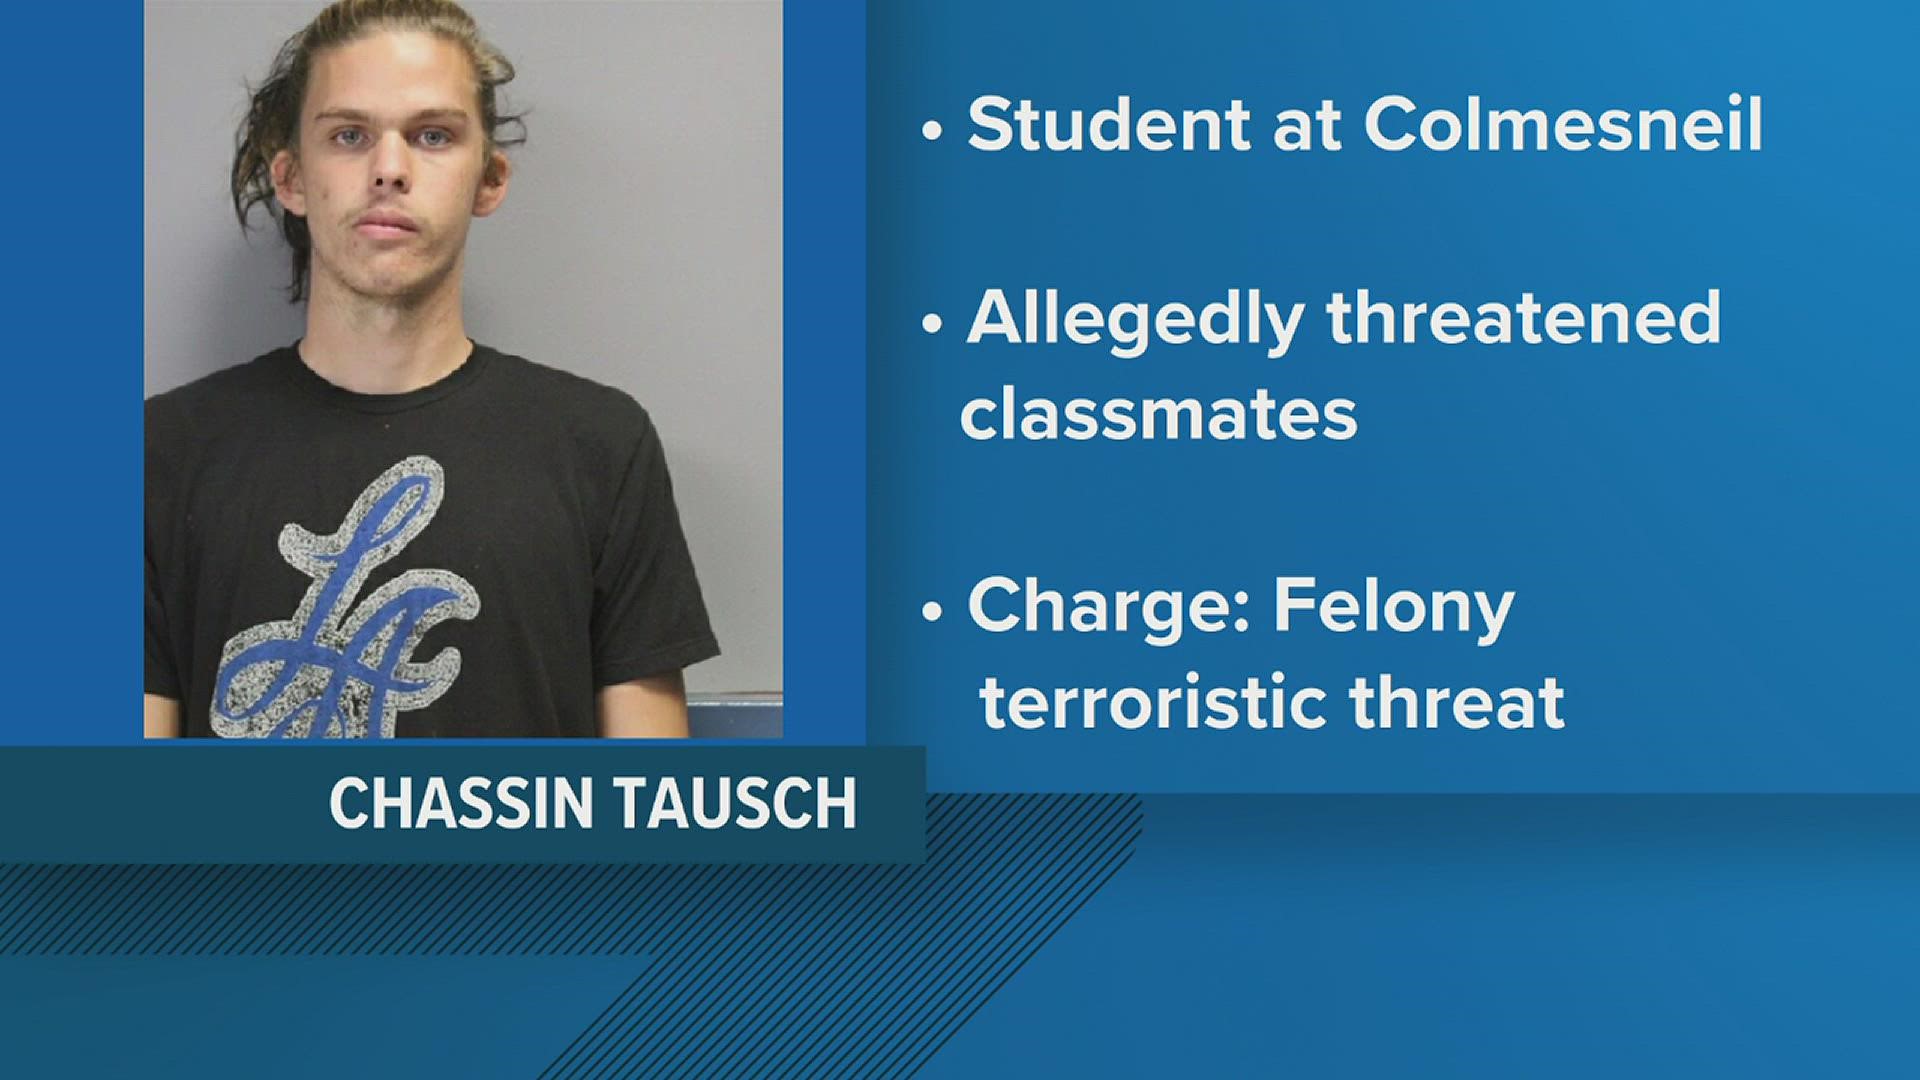 Officials saw video footage showing Tausch appearing to mimic pointing a rifle towards other students.